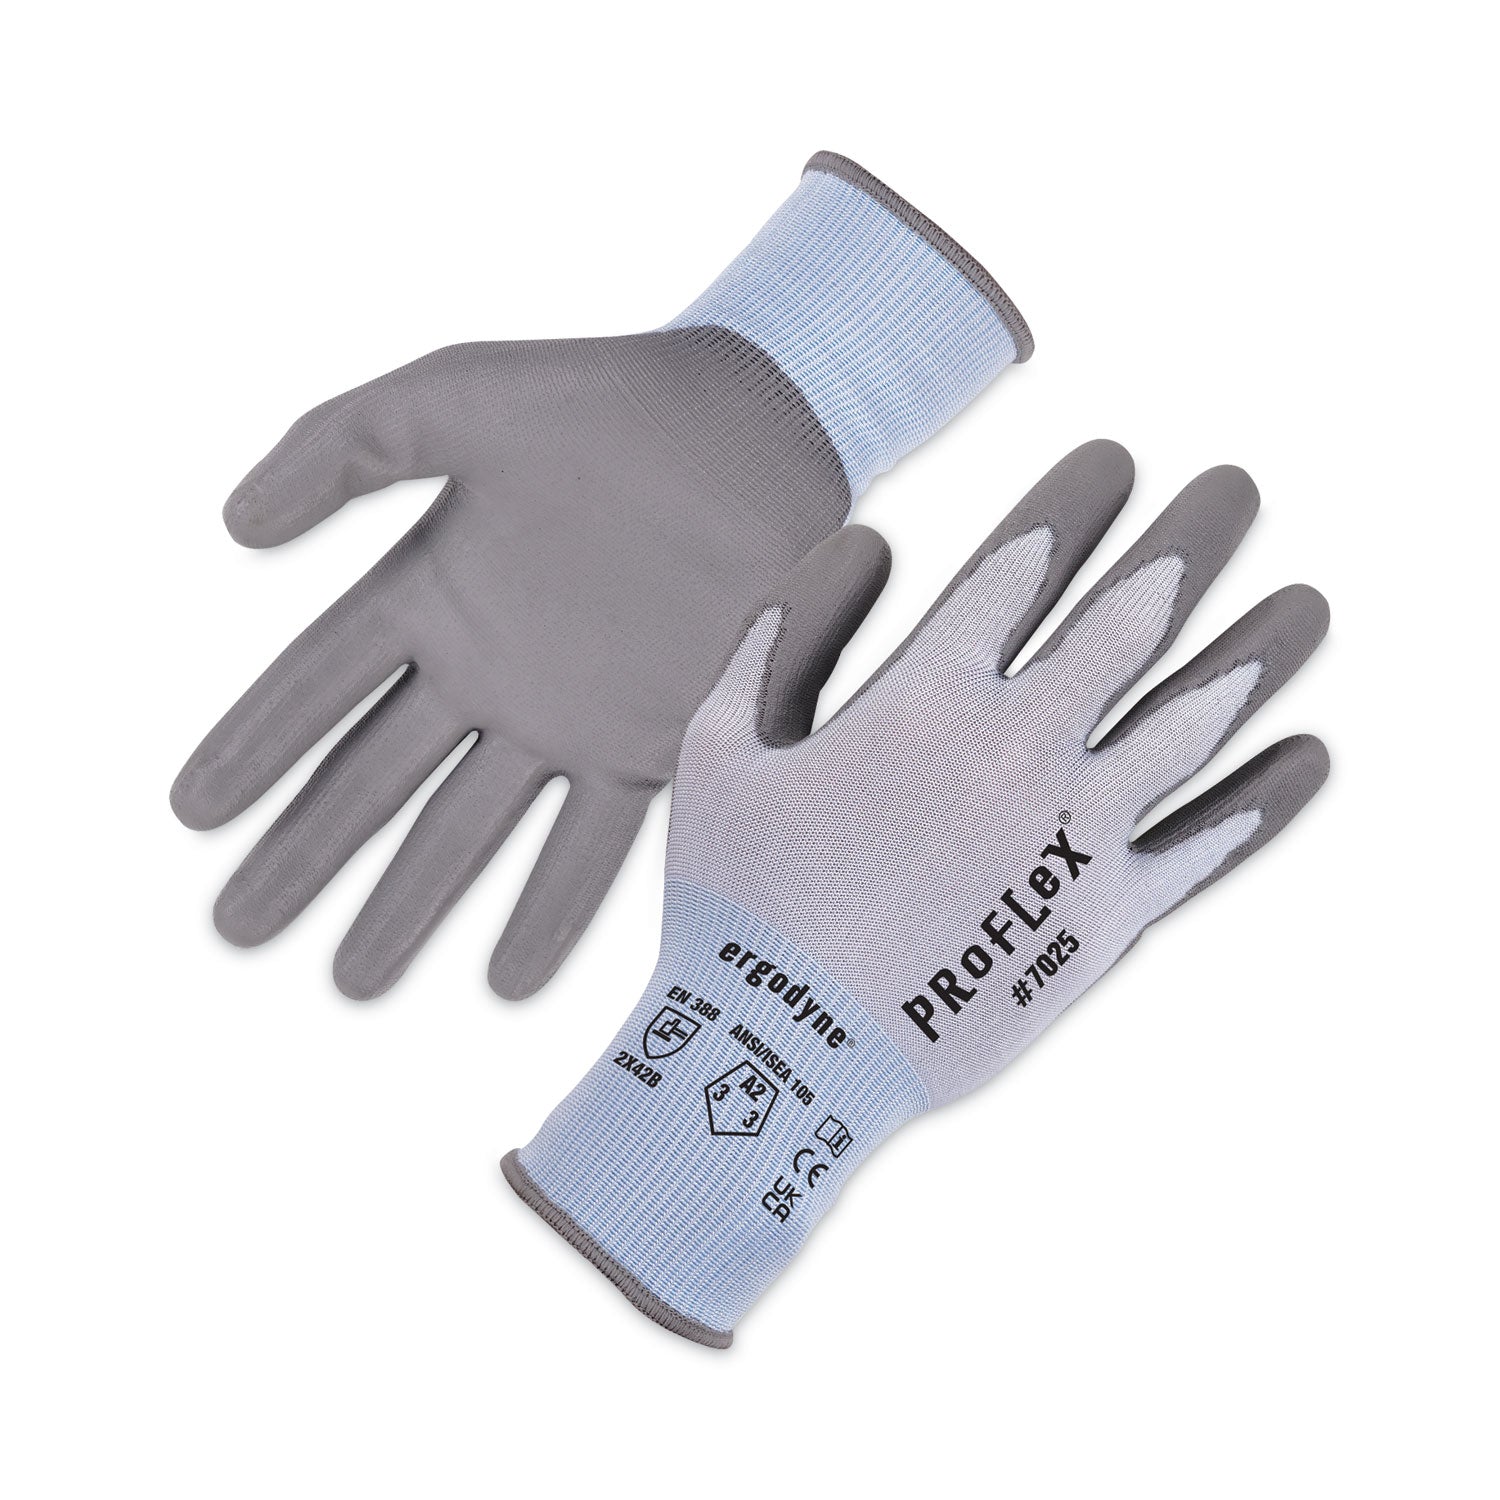 proflex-7025-ansi-a2-pu-coated-cr-gloves-blue-medium-pair-ships-in-1-3-business-days_ego10433 - 1